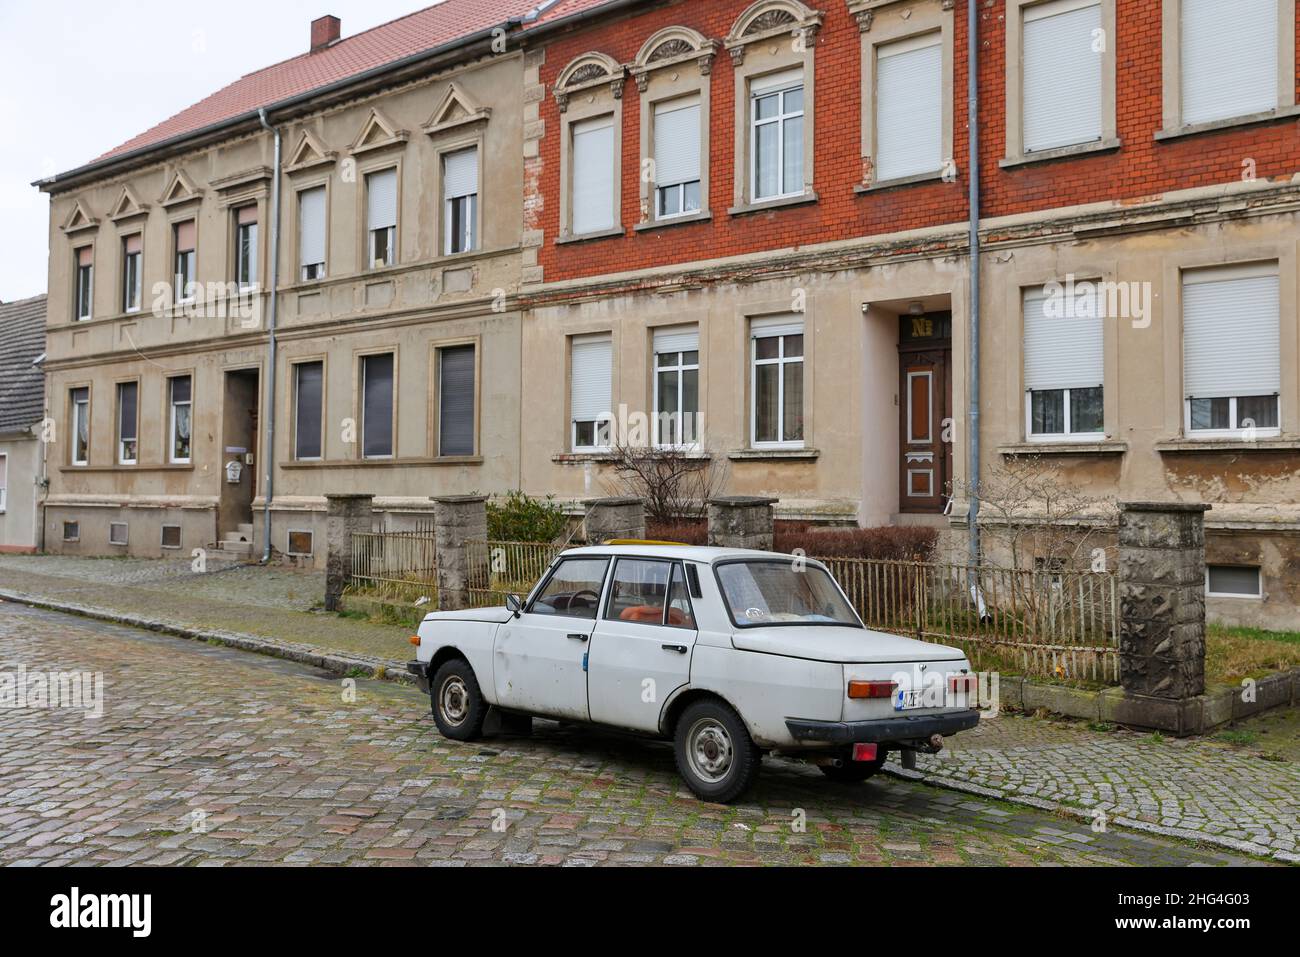 18 January 2022, Saxony-Anhalt, Dessau-Roßlau: A Wartburg 353 stands in a small cobblestone street in the Rosslau district. The former dream car from the VEB Automobilwerk Eisenach is rarely seen on the road anymore. 30 years after production was halted in April 1991, 8361 Wartburgs were registered in Germany, according to the Federal Motor Transport Authority. A good 1.2 million cars of the brand were built between 1955 and 1991. Photo: Jan Woitas/dpa-Zentralbild/dpa Stock Photo